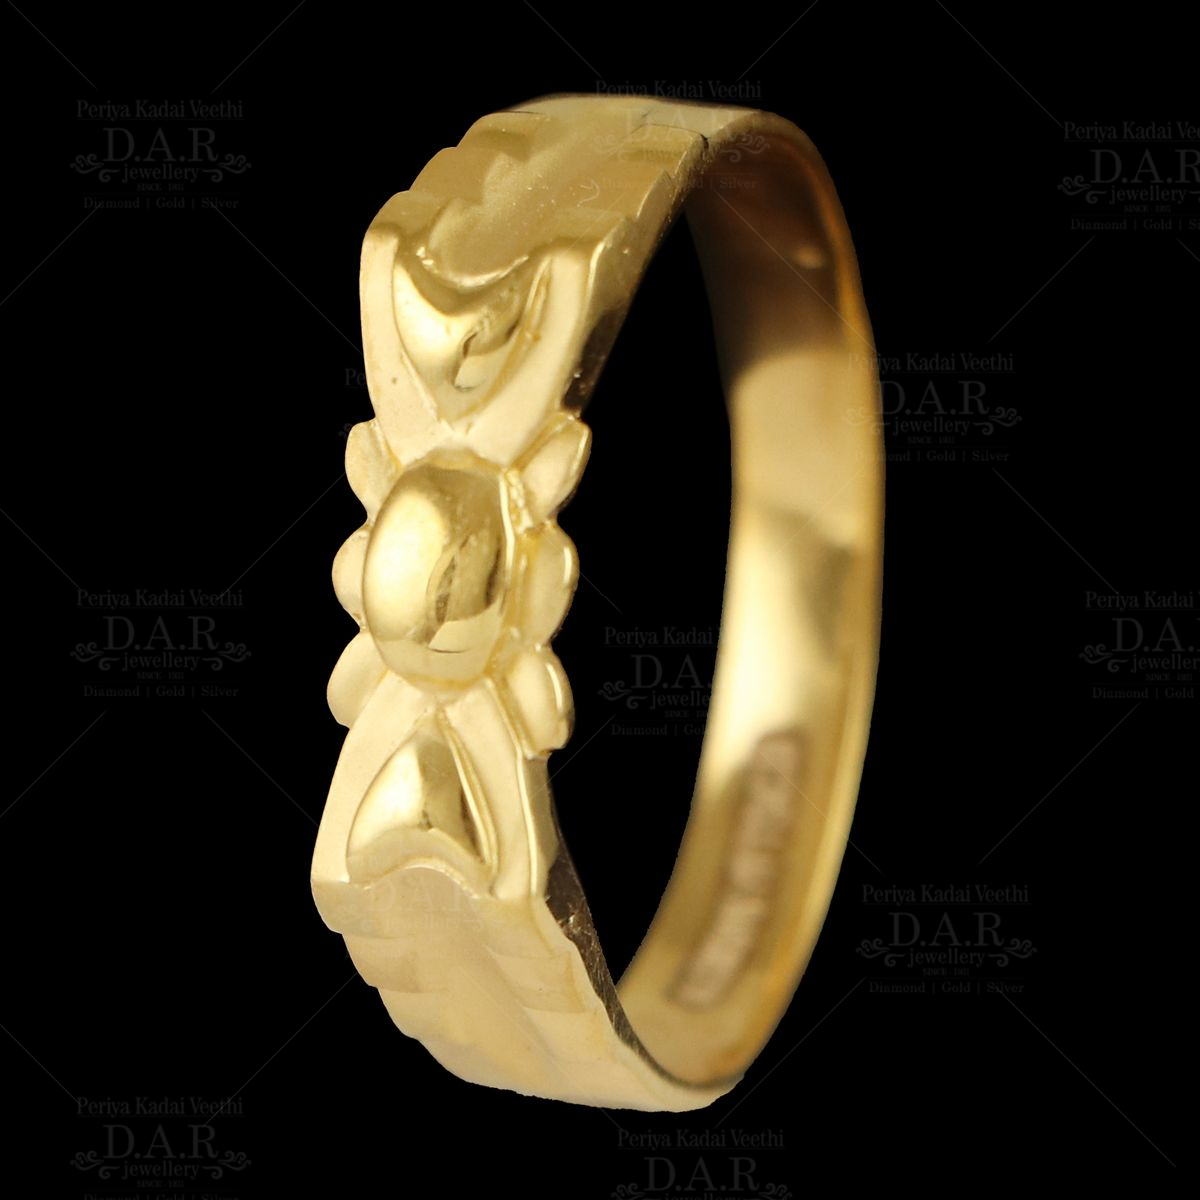 Buy quality 22kt gold plain casting gents ring in Chennai